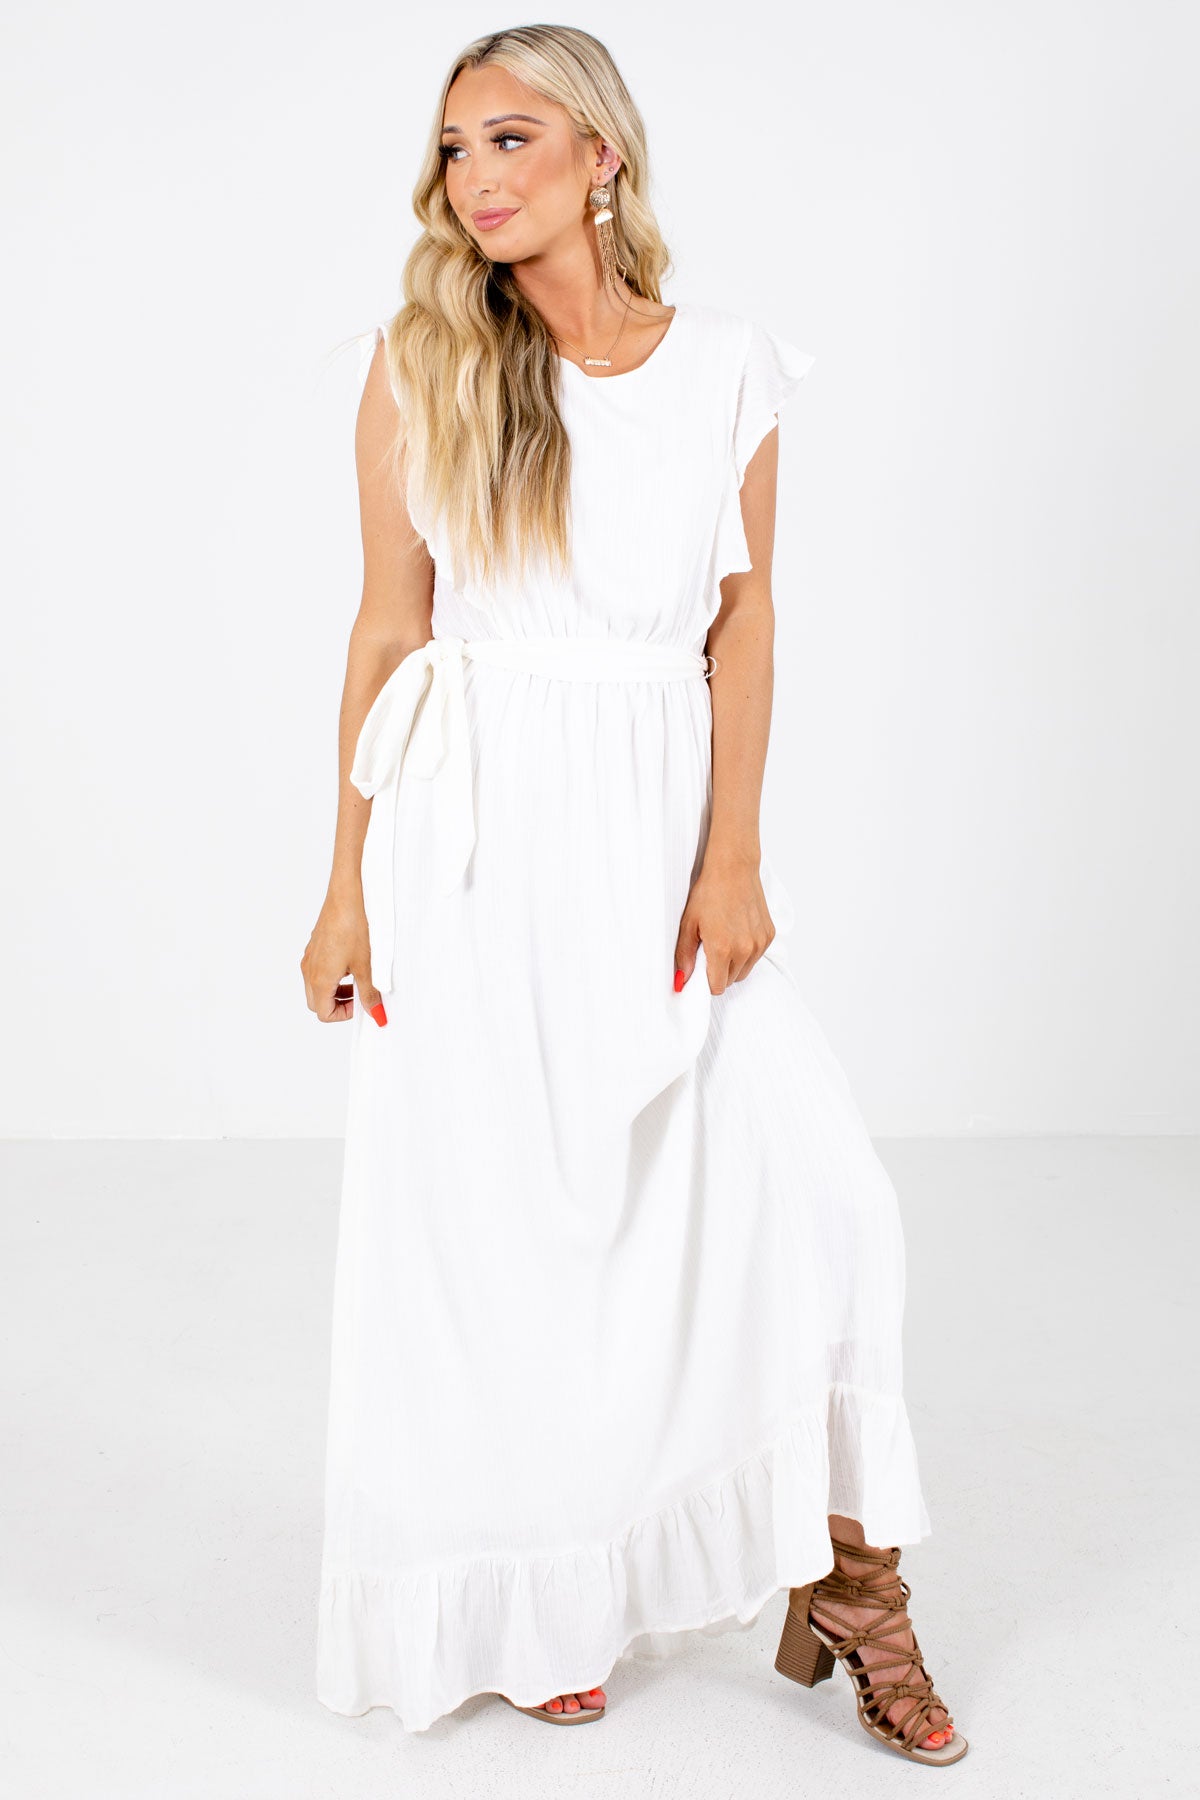 White Ruffle Accented Boutique Maxi Dresses for Women